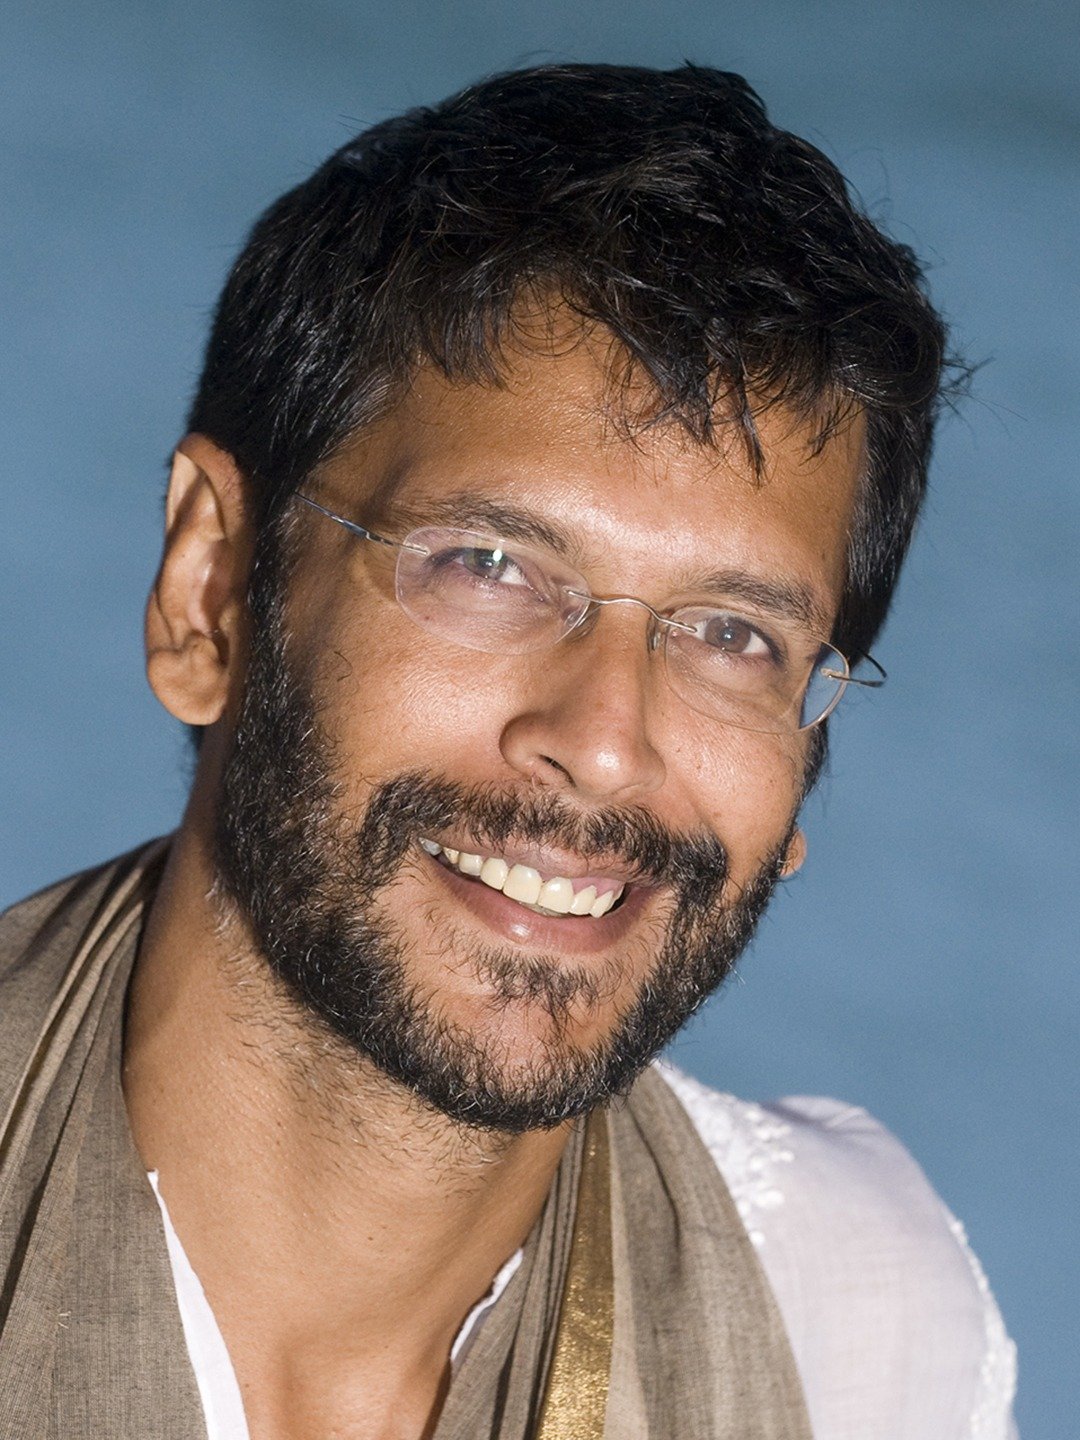 Milind Soman Gets A “Fauji Cut” And “It Took Only 12 Minutes”